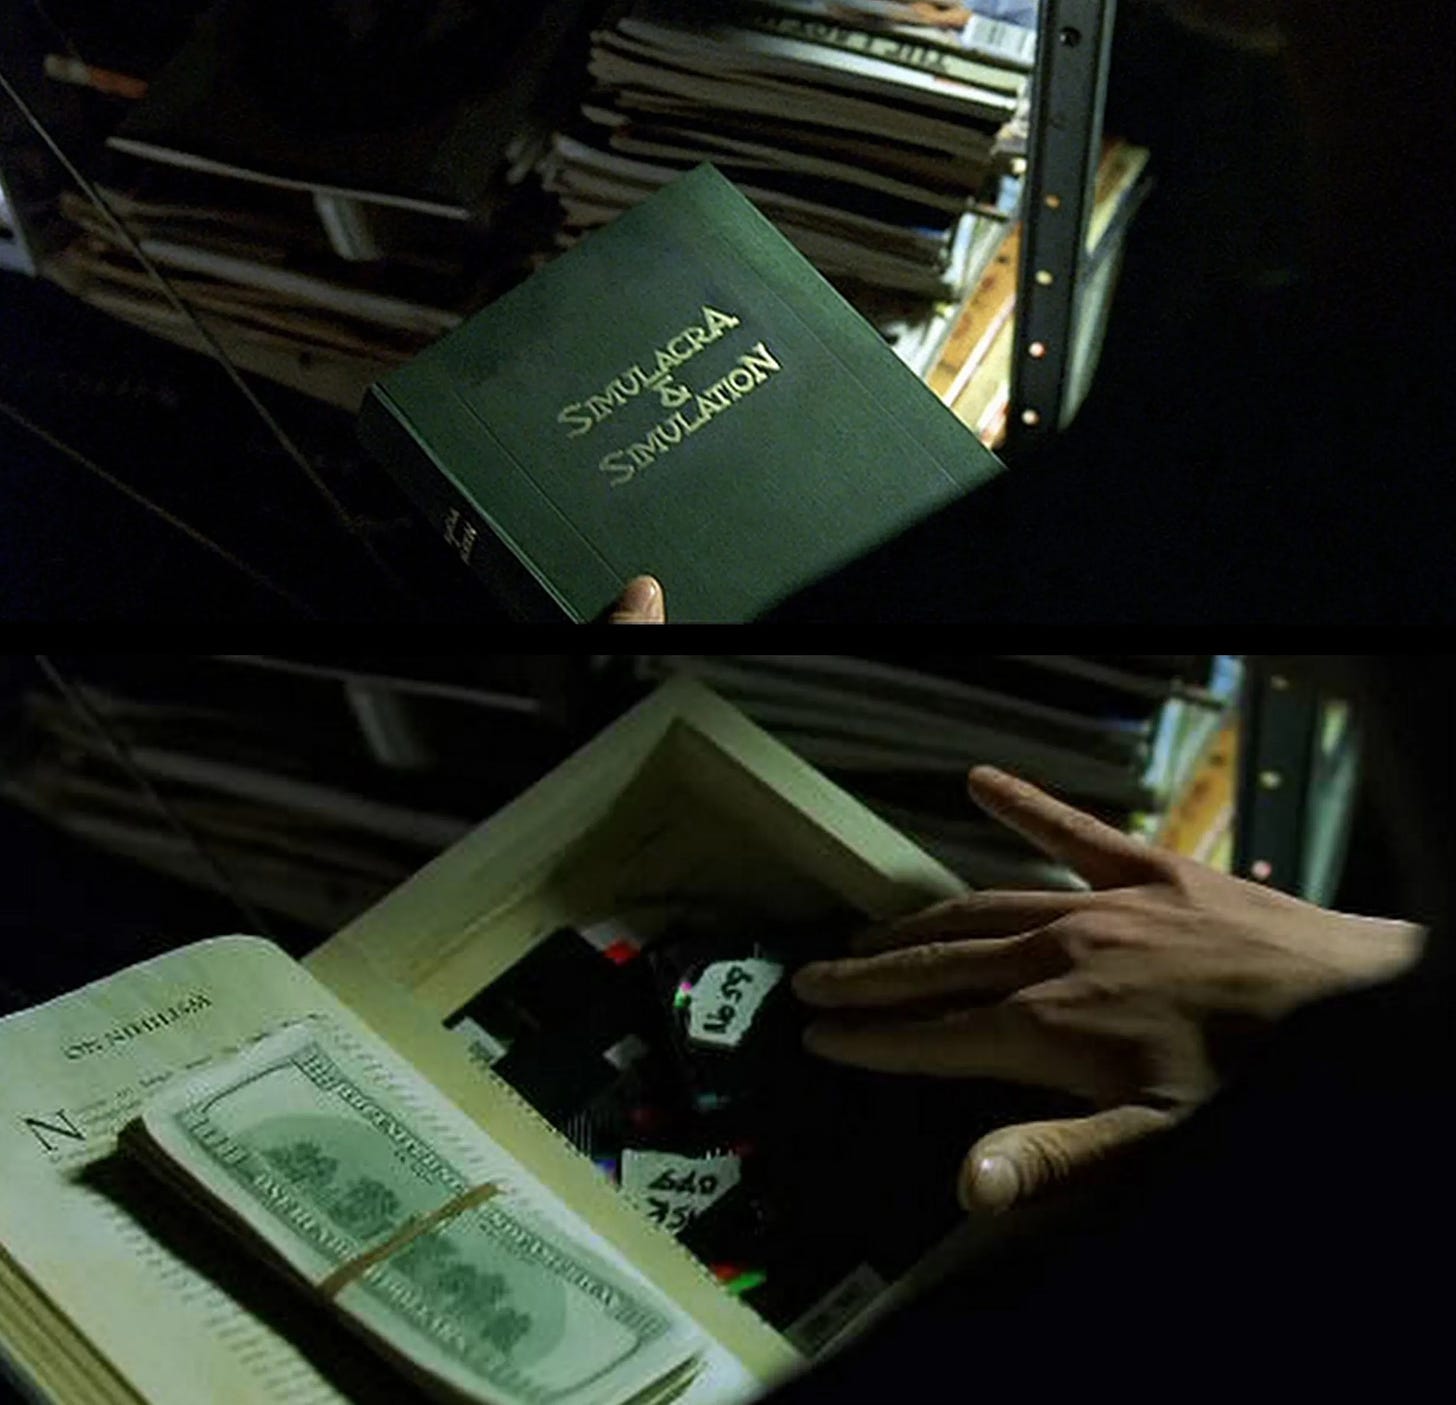 Simulacra and Simulation, philosophical treatise by Jean Baudrillard, in  the movie The Matrix (1999) : r/scifi